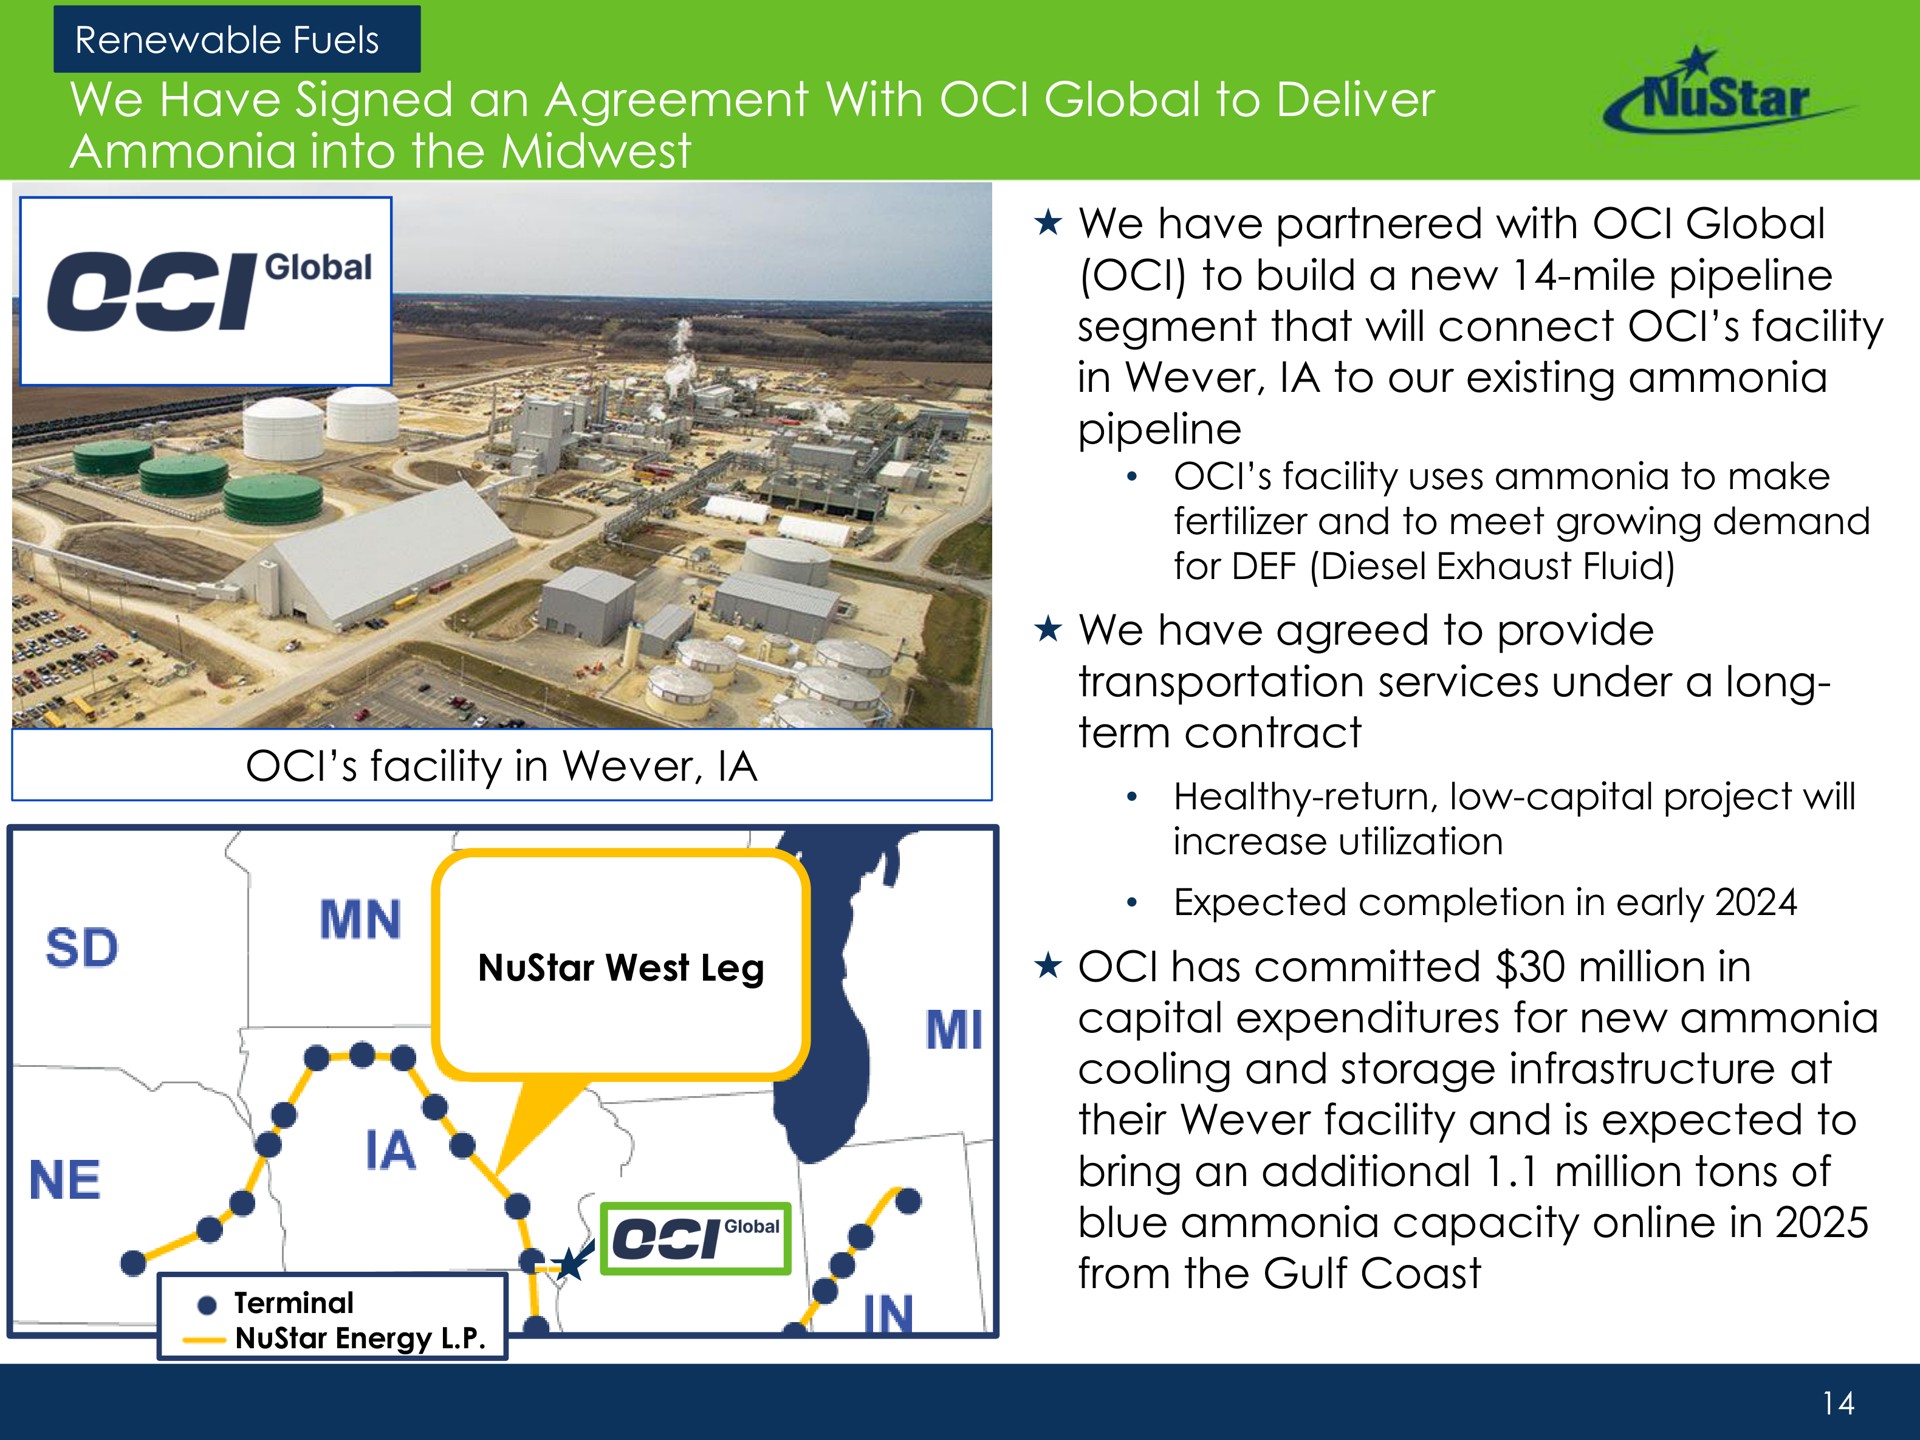 we have signed an agreement with global to deliver ammonia into the build a new mile pipeline segment that will connect facility agreed provide transportation services under a long term contract expected completion in early a min cooling and storage infrastructure at their facility and is expected blue capacity in | NuStar Energy